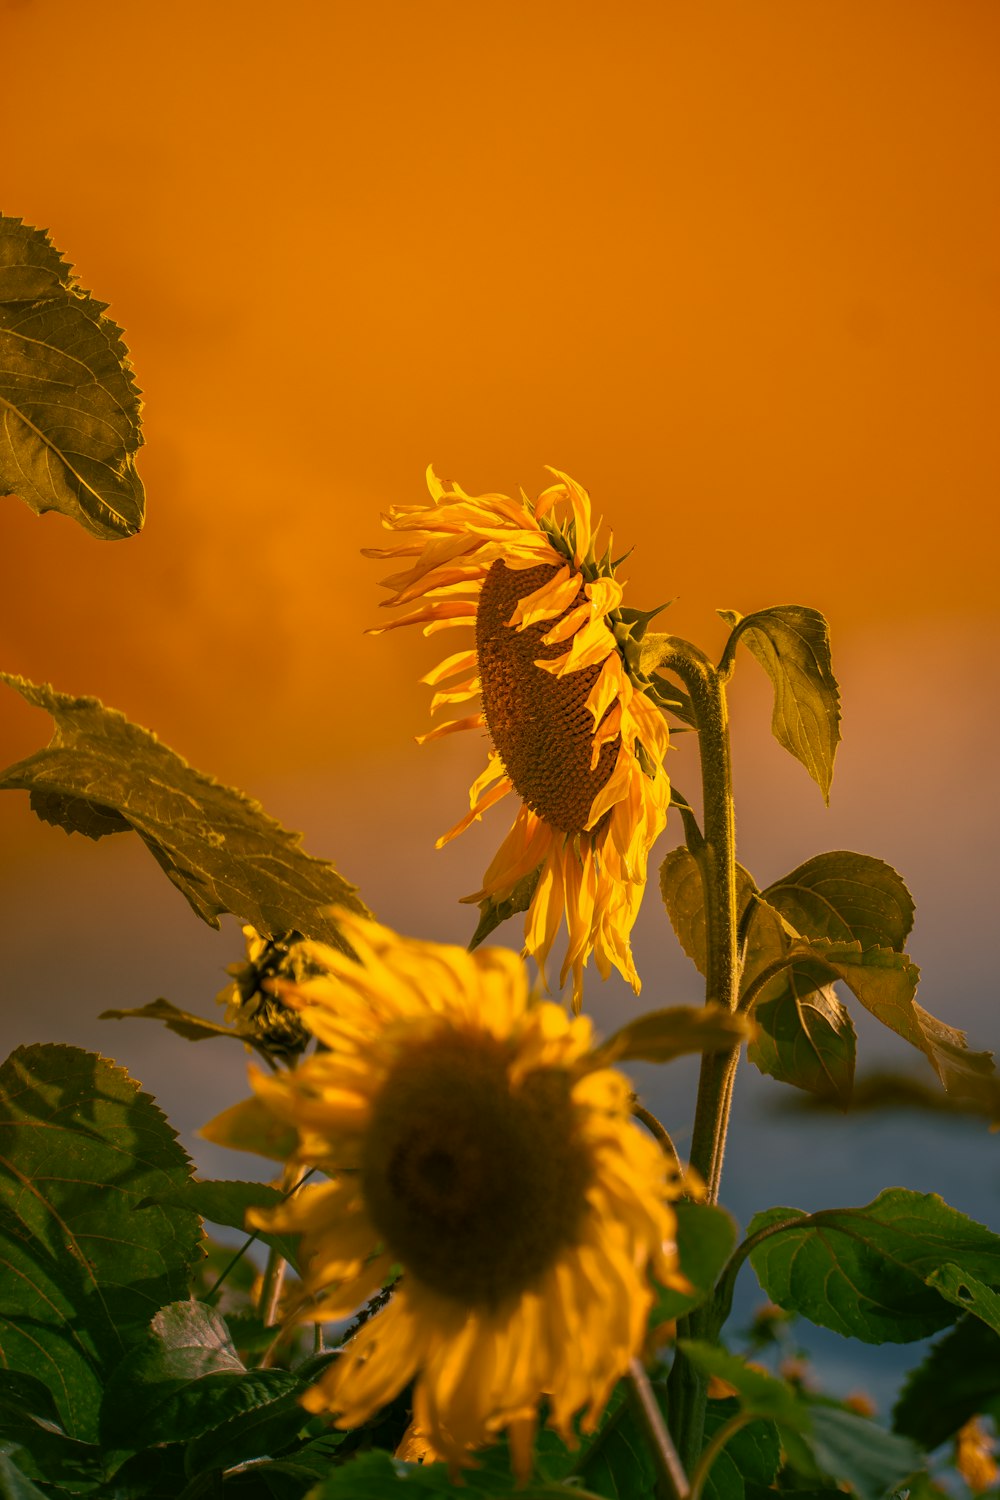 a large sunflower in a field with a sunset in the background